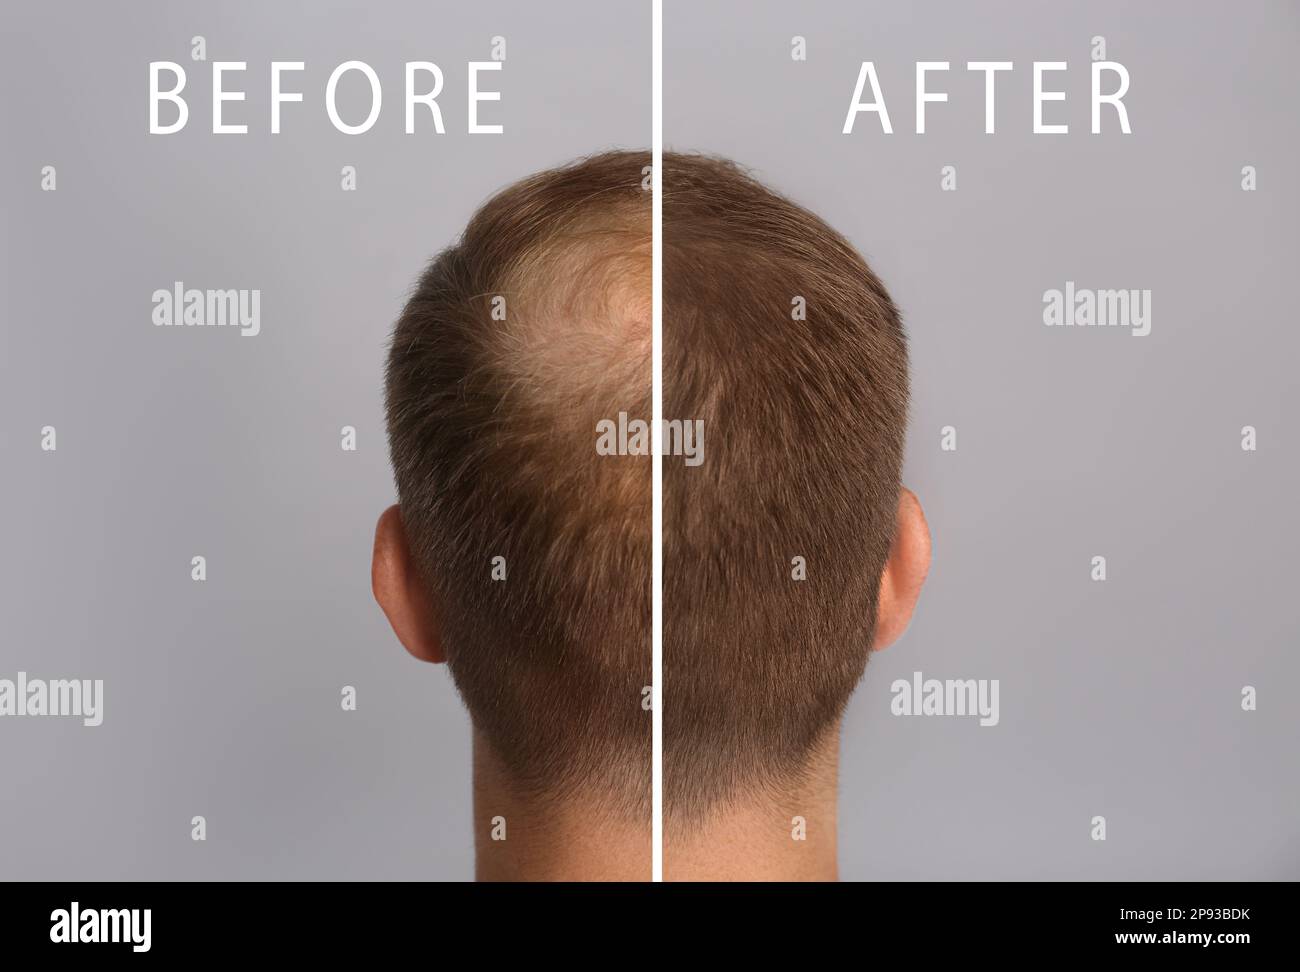 Man With Hair Loss Problem Before And After Treatment On Grey